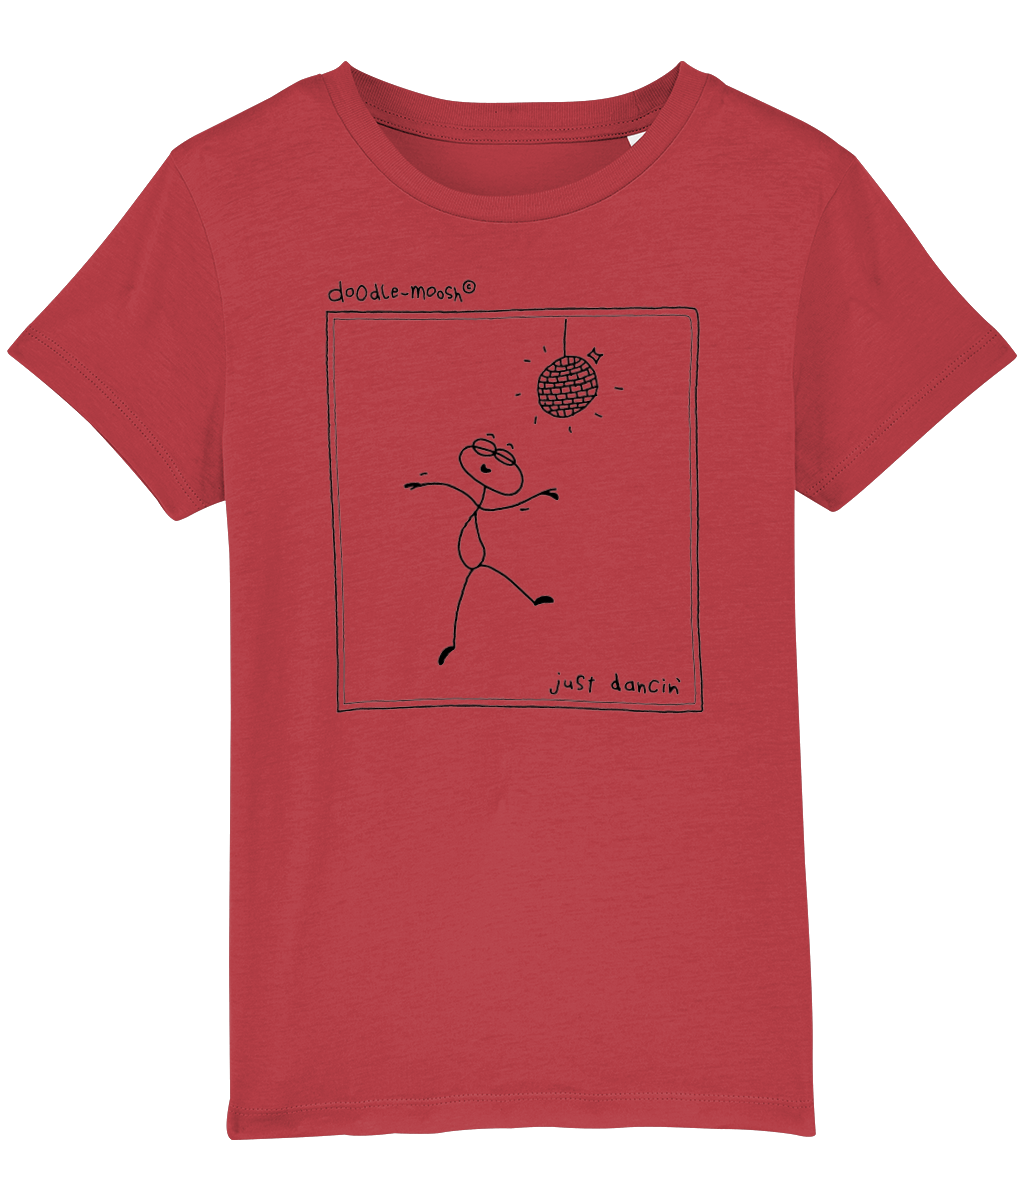 Just dancing t-shirt, red with black